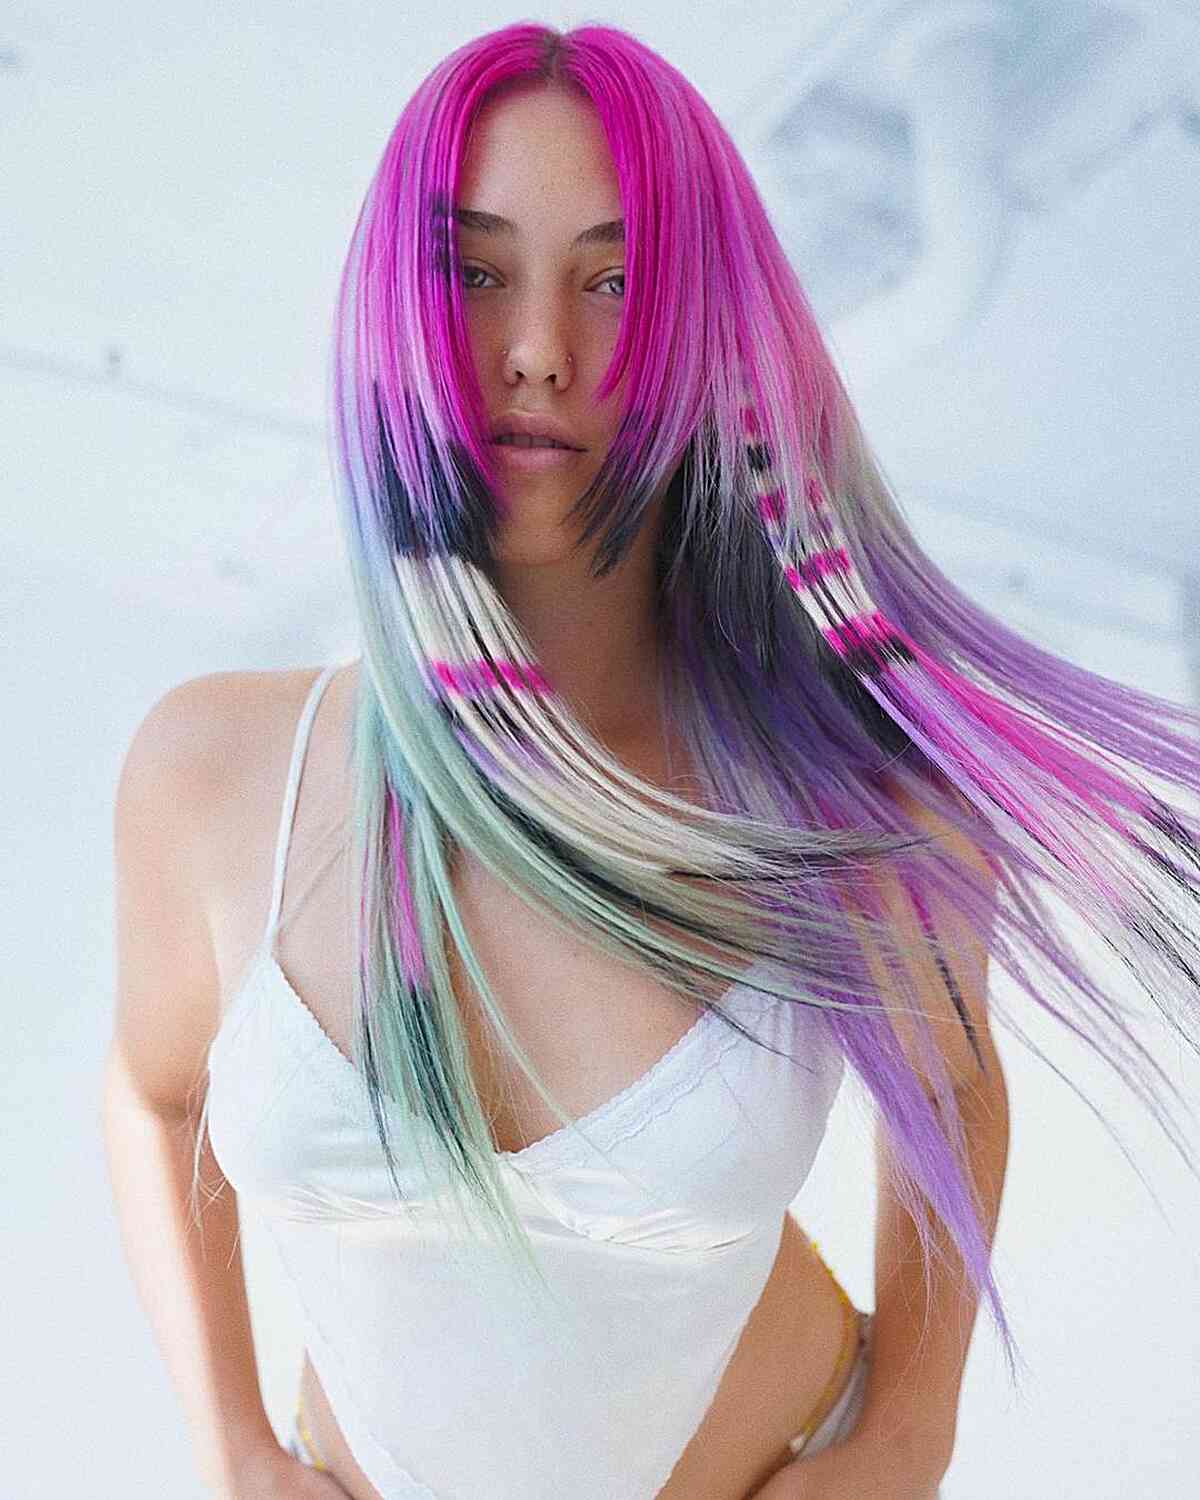 Alt Colorful Hime Cut with Horizontal Dye Job for Long Hair